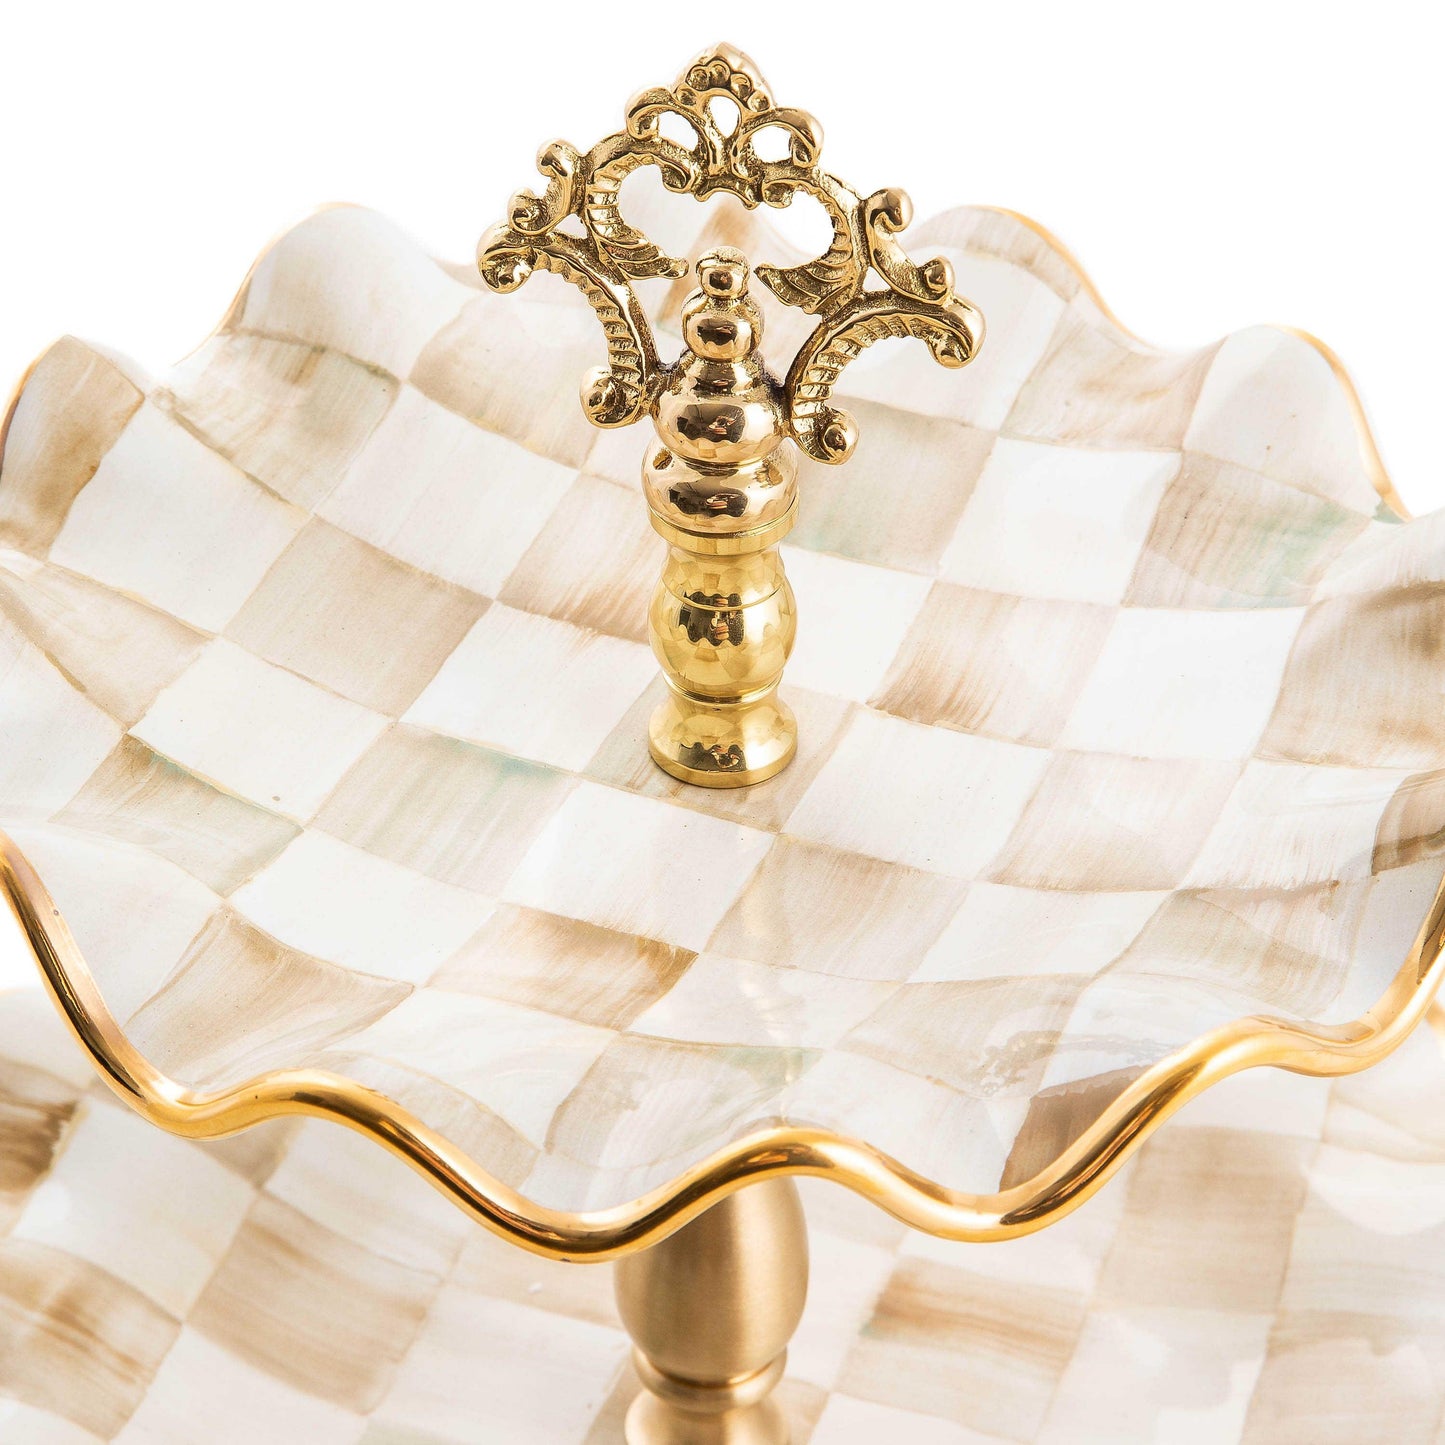 Parchment Check Three Tier Sweet Stand (Mackenzie Childs) - Gallery Gifts Online 